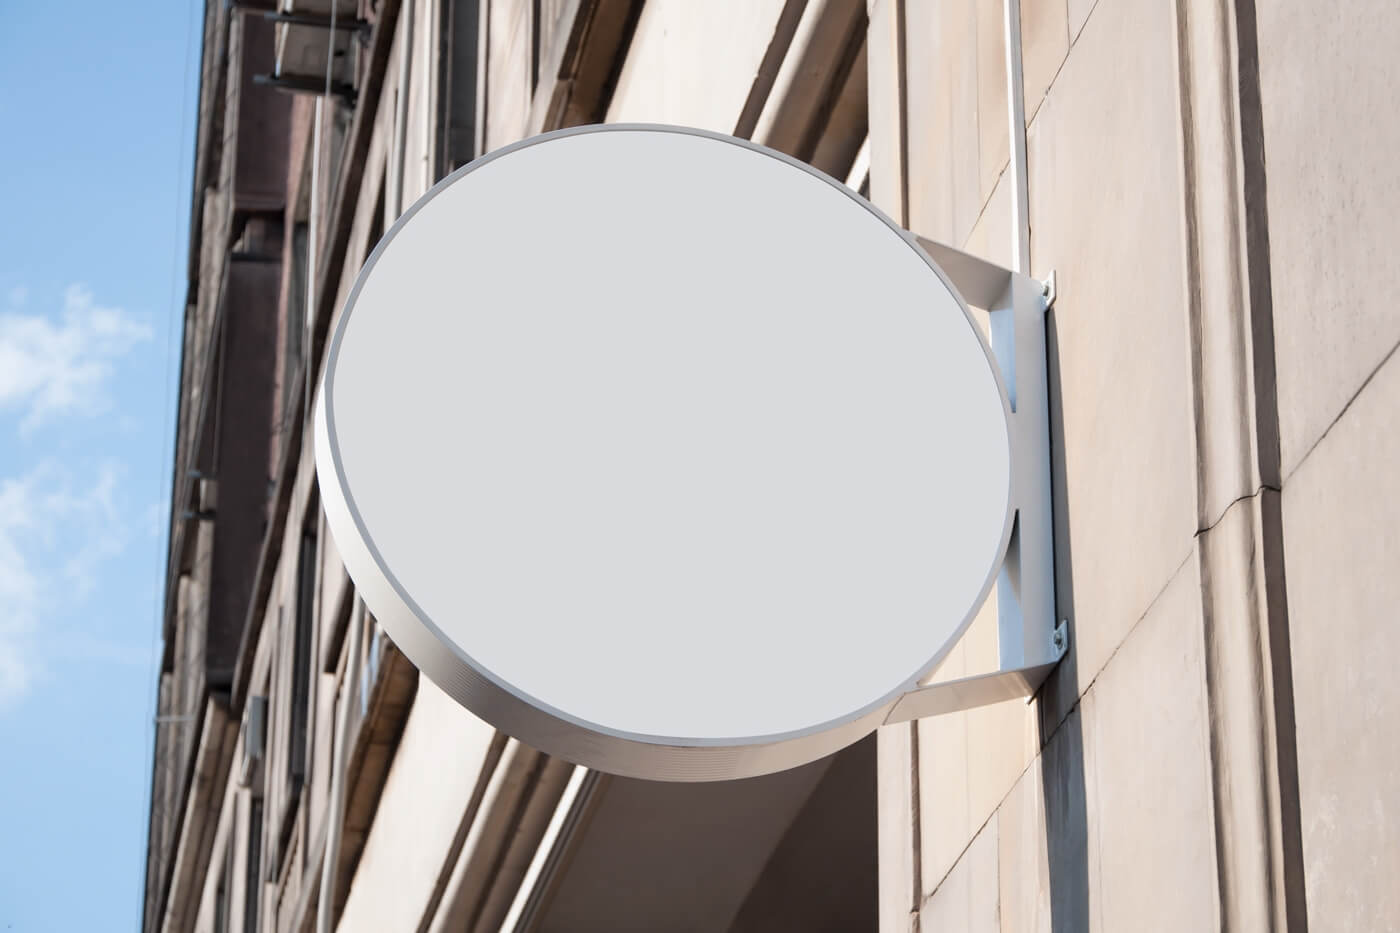 Round Sign Mockup on Building